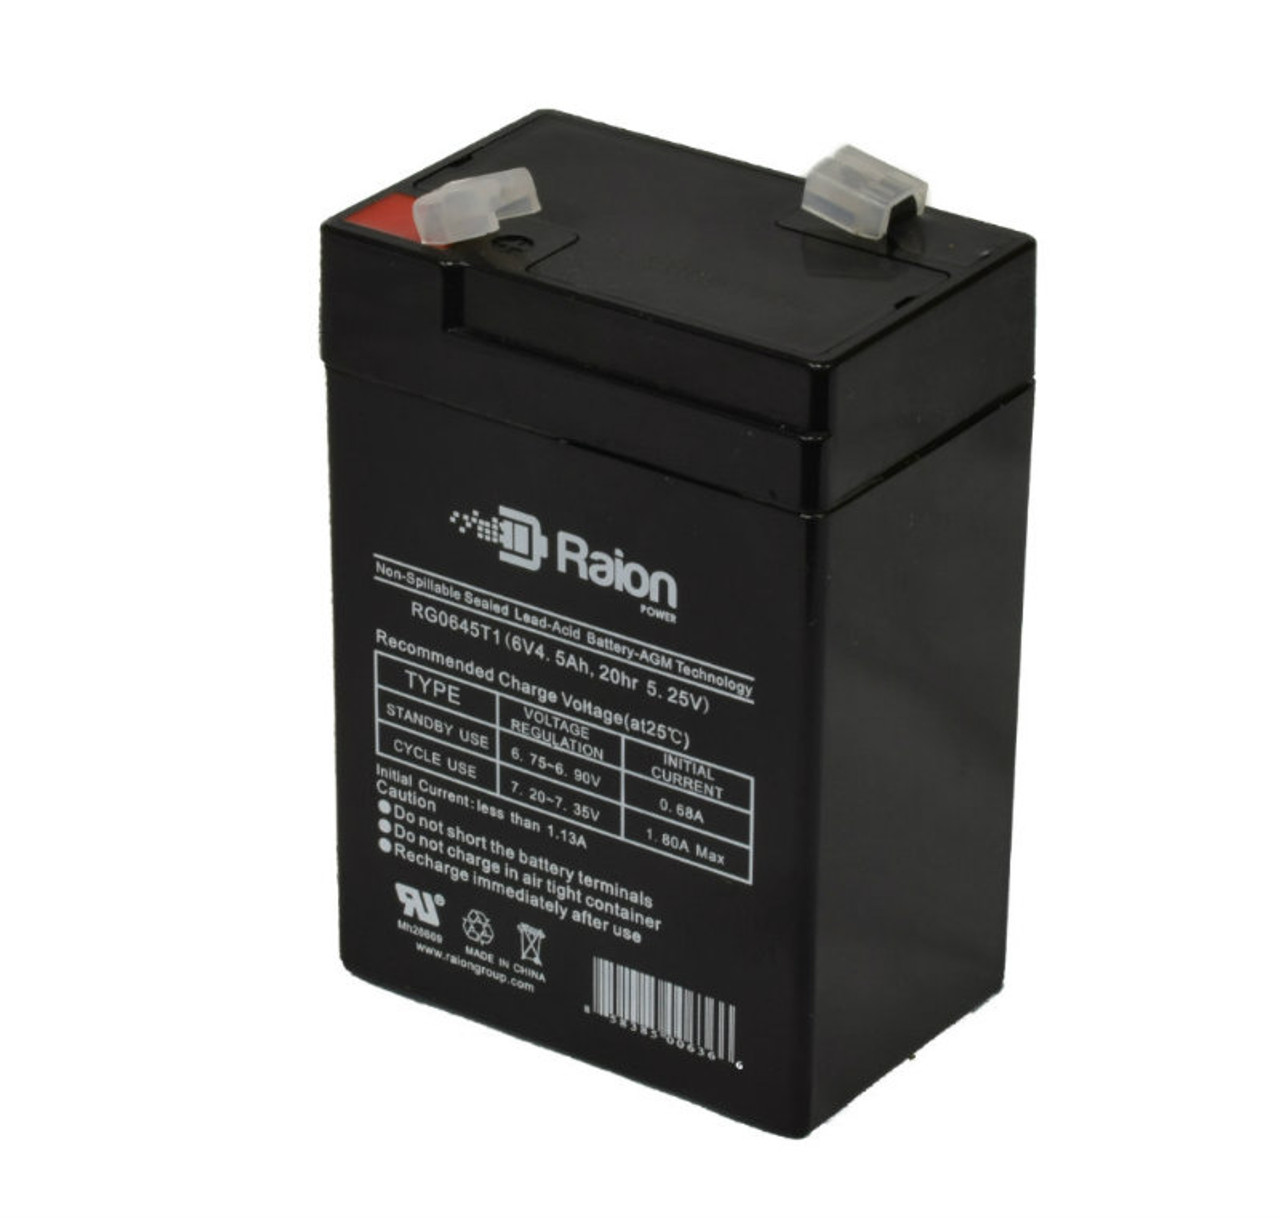 Raion Power RG0645T1 6V 4.5Ah Replacement Battery Cartridge for Alaris Medical Intell Pump 821